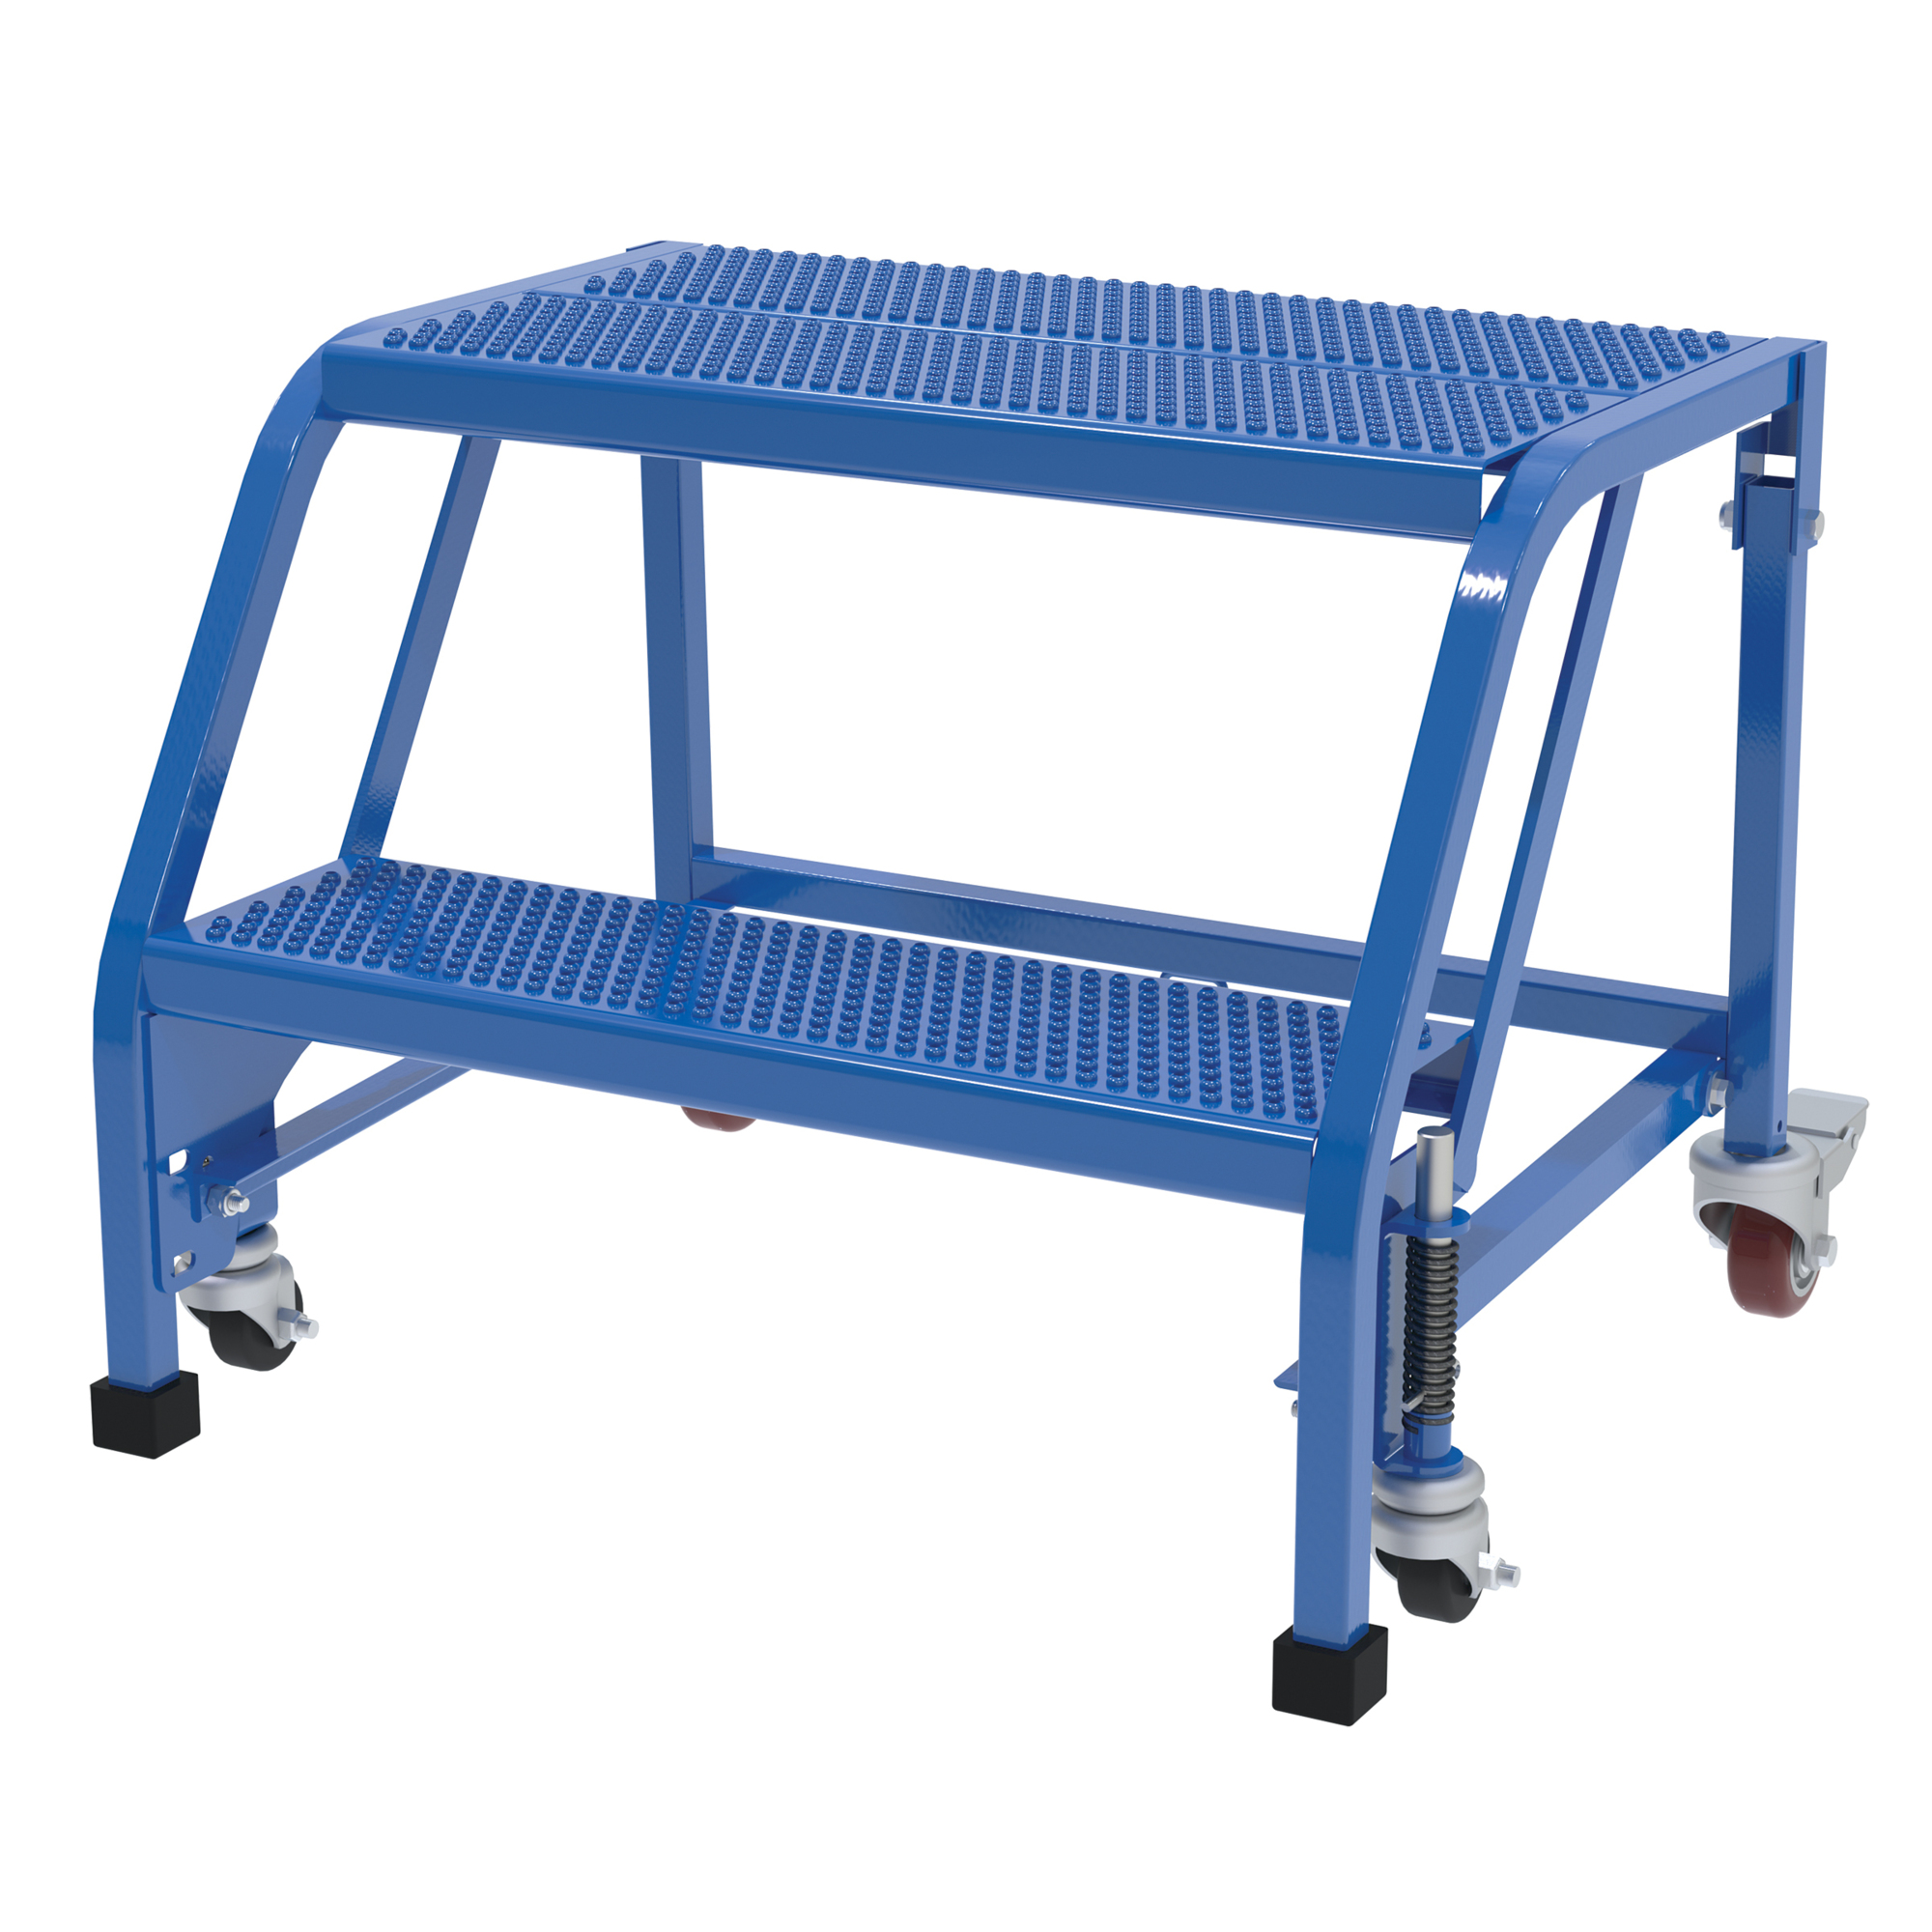 Vestil, 2 Step perforated warehouse ladder no rail, Overall Height 20 in, Steps 2 Material Steel, Model LAD-PW-26-2-P-NHR